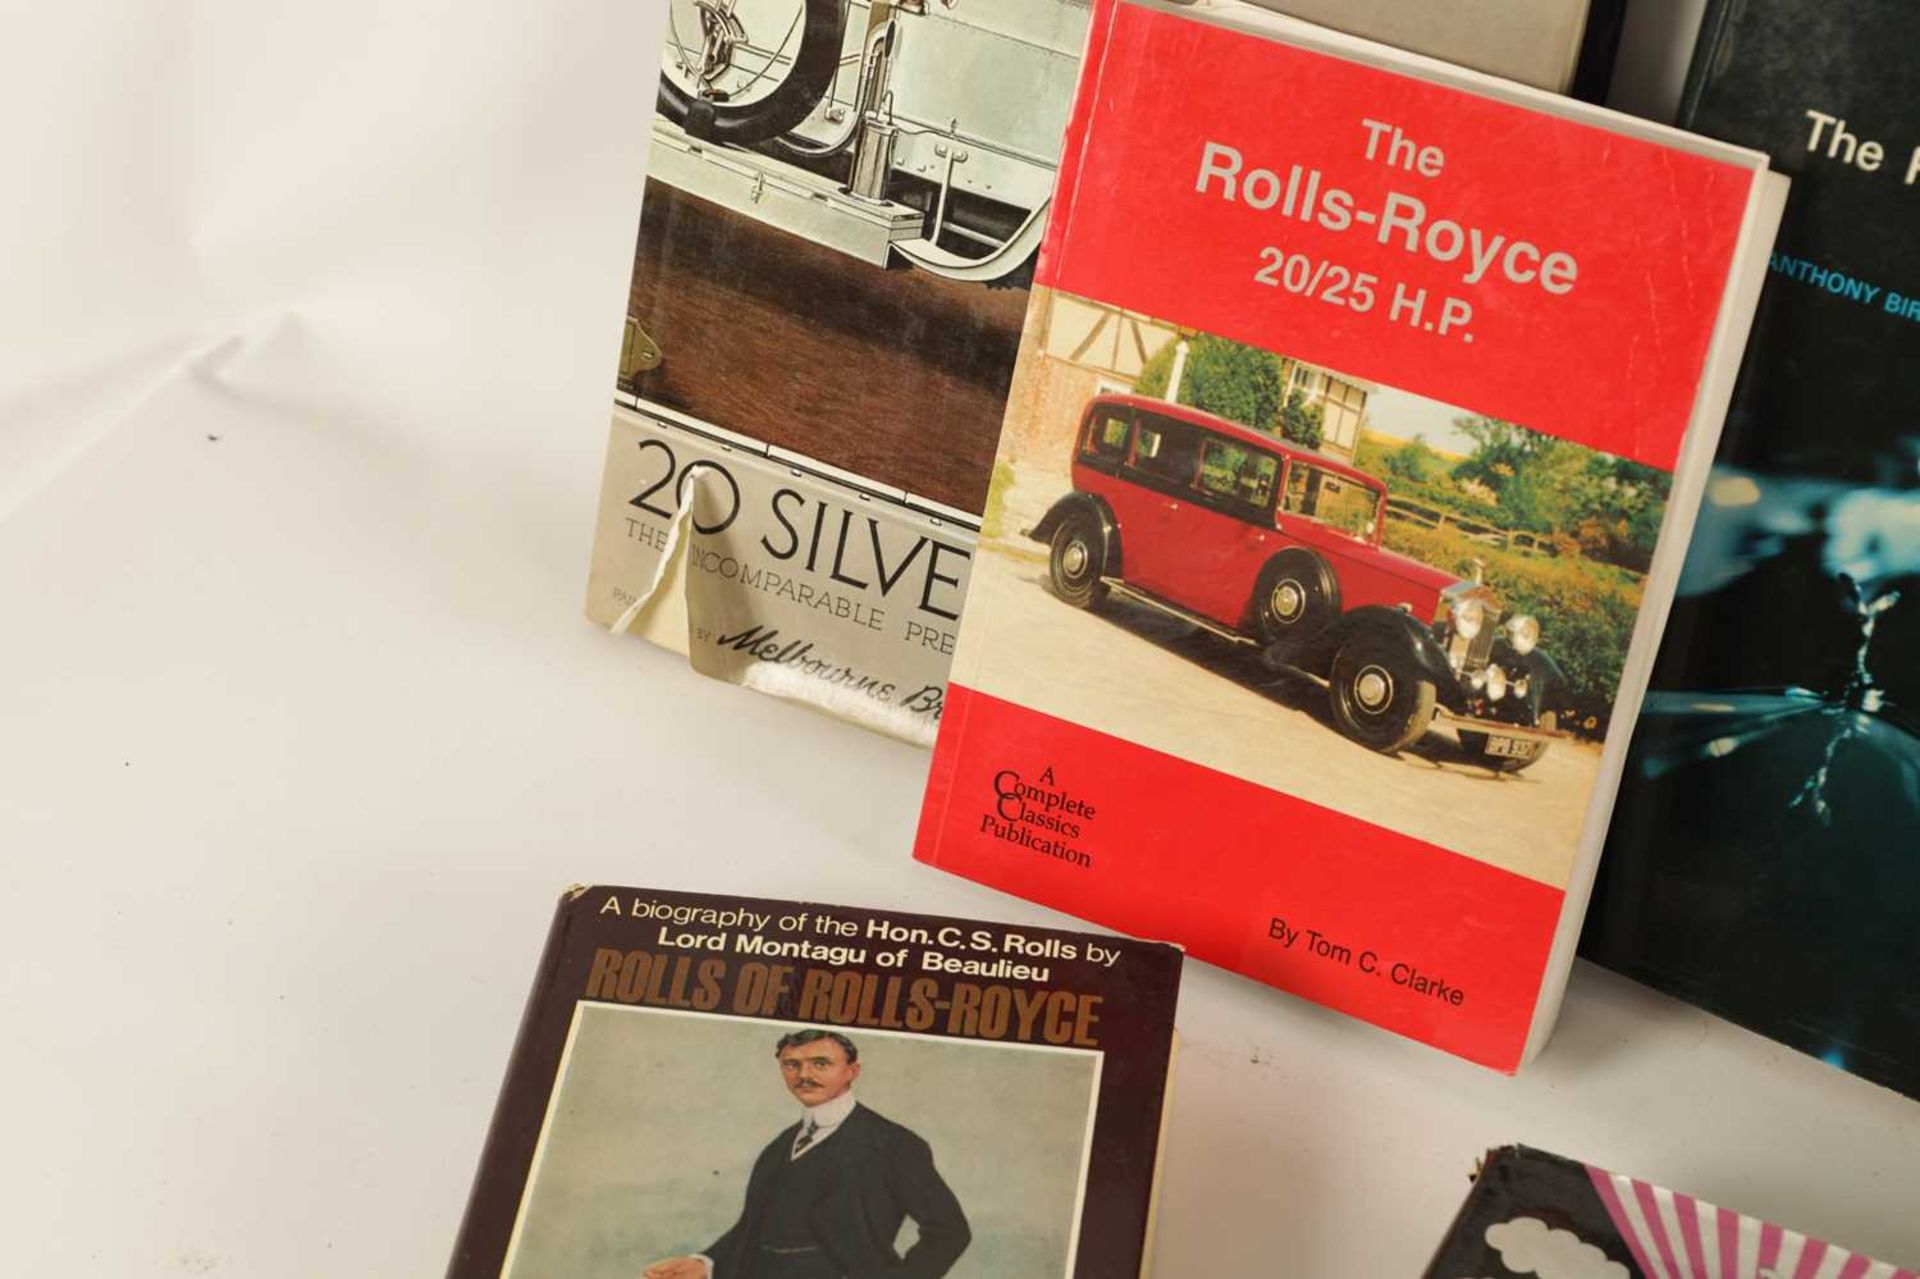 A COLLECTION OF TWENTY HARDBACK AND SOFT BACK ROLLS-ROYCE BOOKS - Image 7 of 17